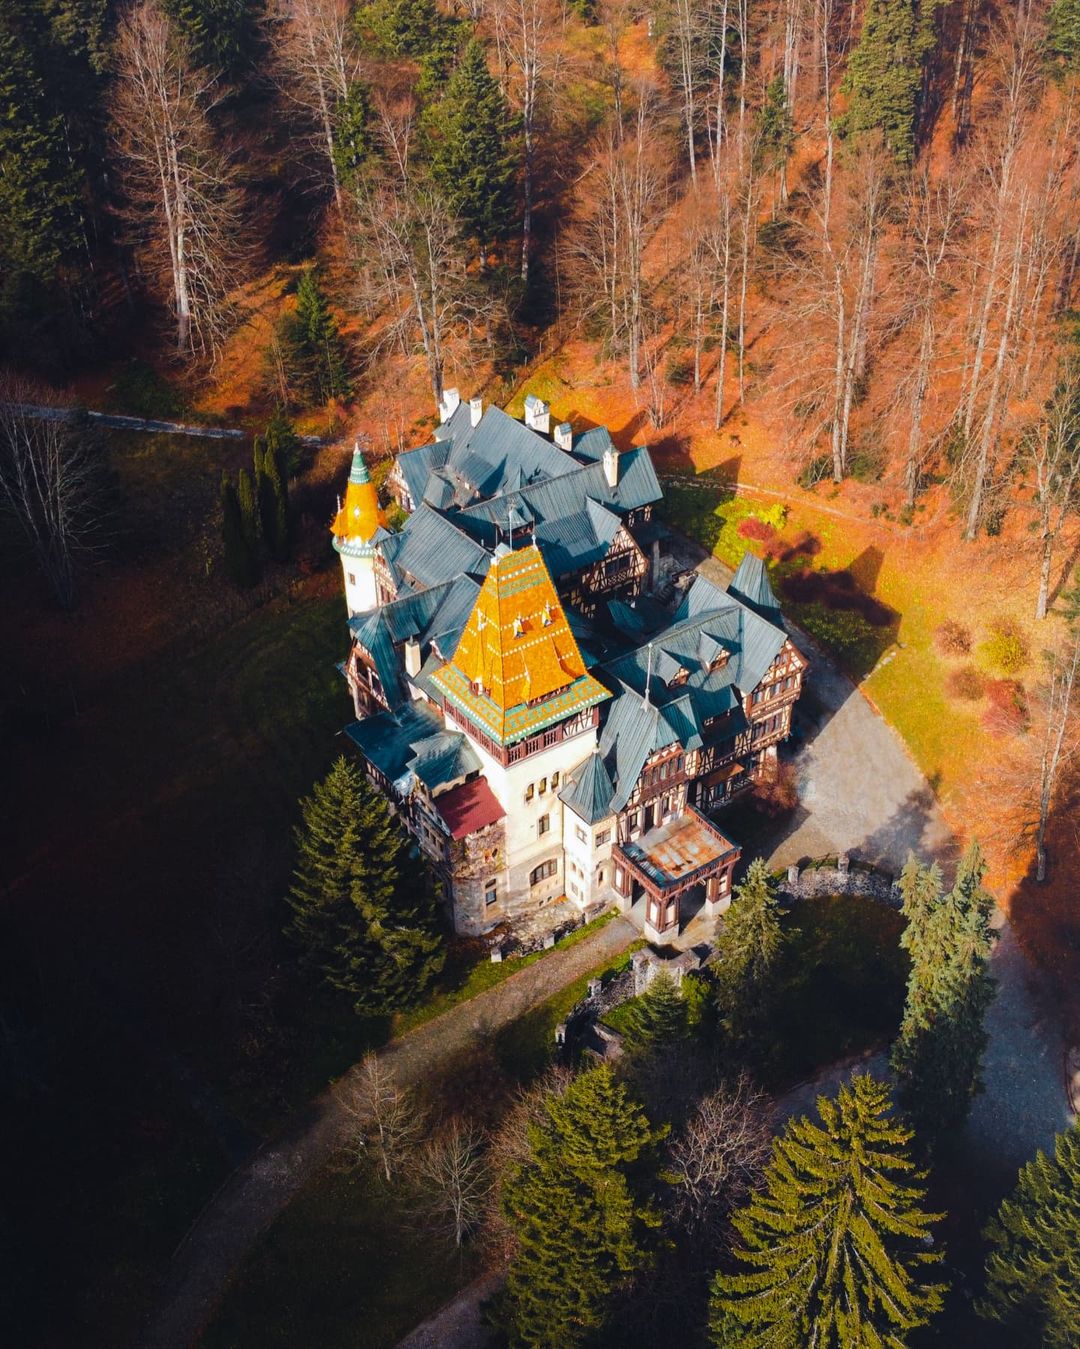 Pelișor Castle was built in 1899–1902 by order of King Carol I, as the residence for his nephew and heir, the future King Ferdinand (son of Carol's brother Leopold von Hohenzollern) and Queen Marie